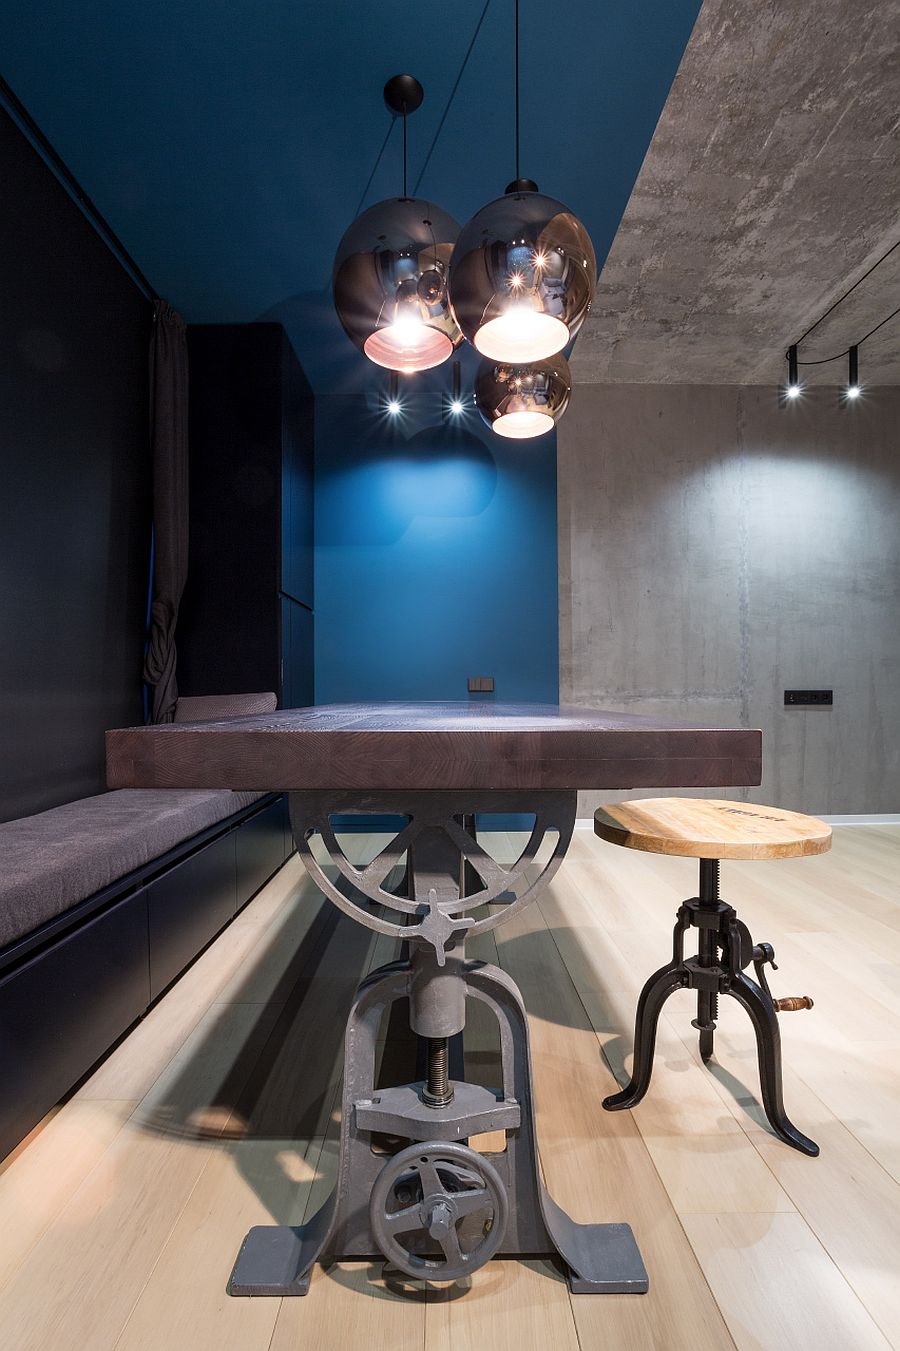 Old-industrial-machinery-has-been-revamped-to-create-the-dining-table-base-52091